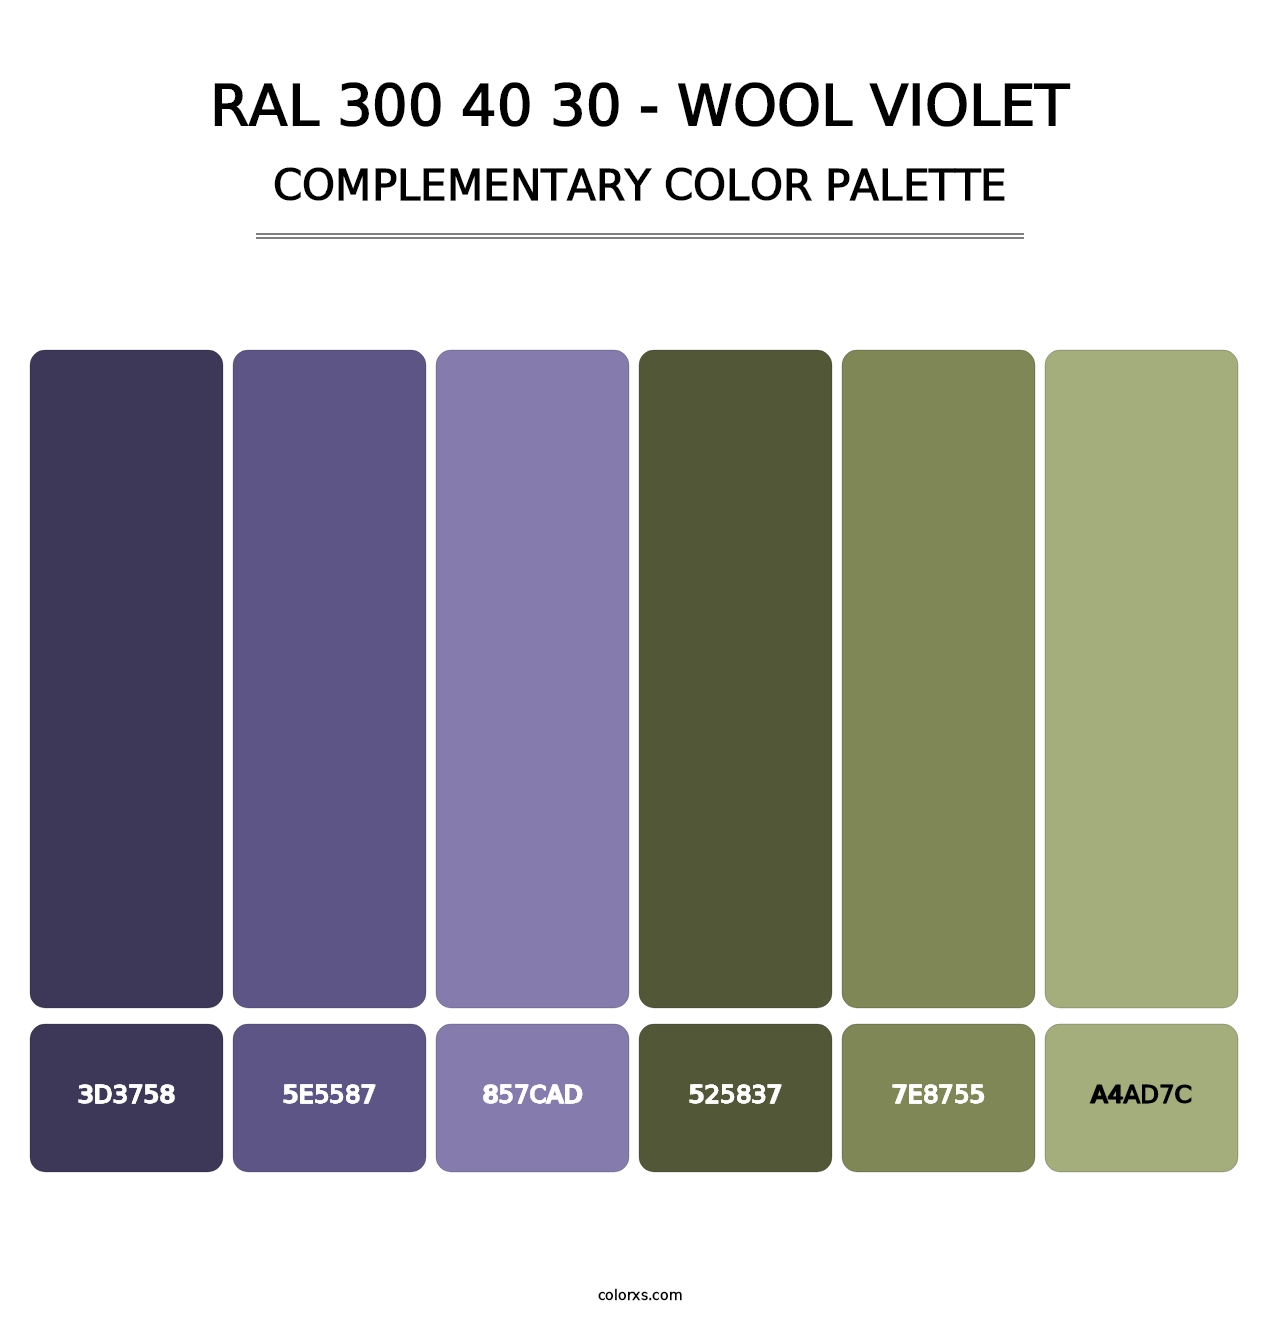 RAL 300 40 30 - Wool Violet - Complementary Color Palette